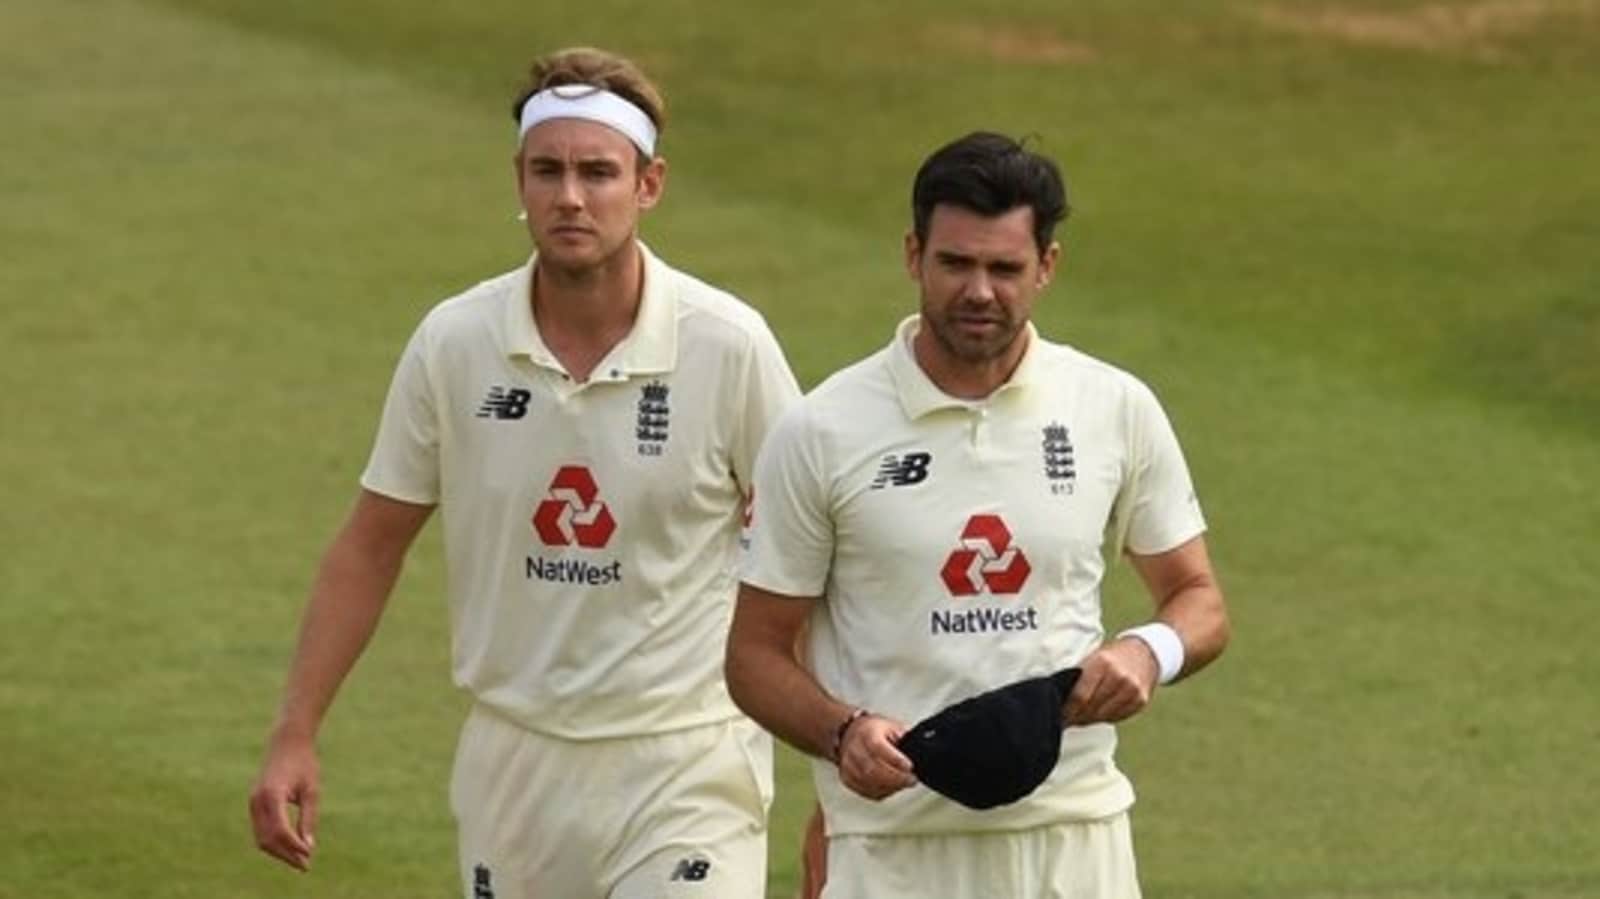 England Drop James Anderson And Stuart Broad For West Indies Test Tour: Reports